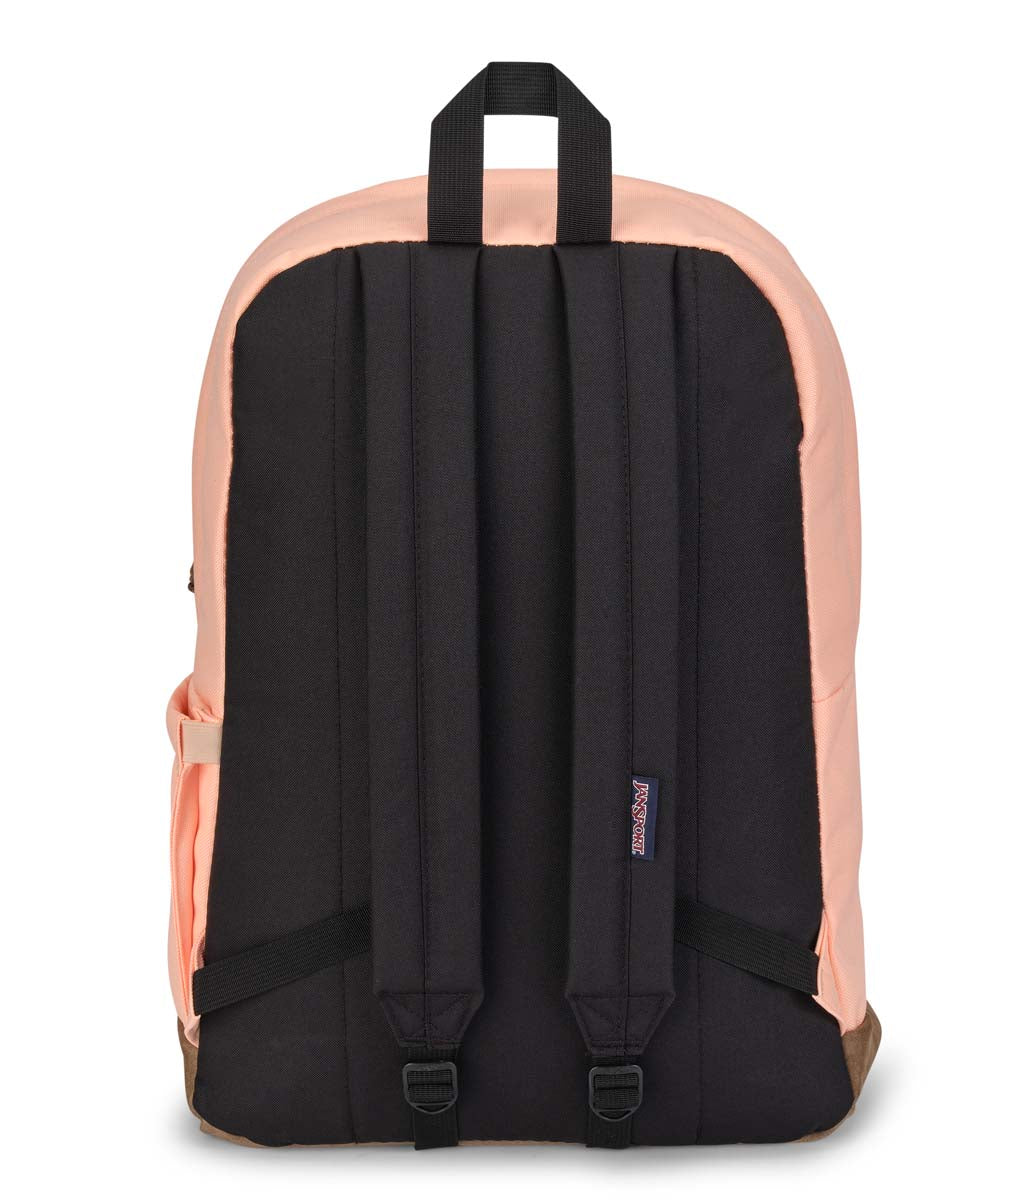 RIGHT PACK Peach Neon